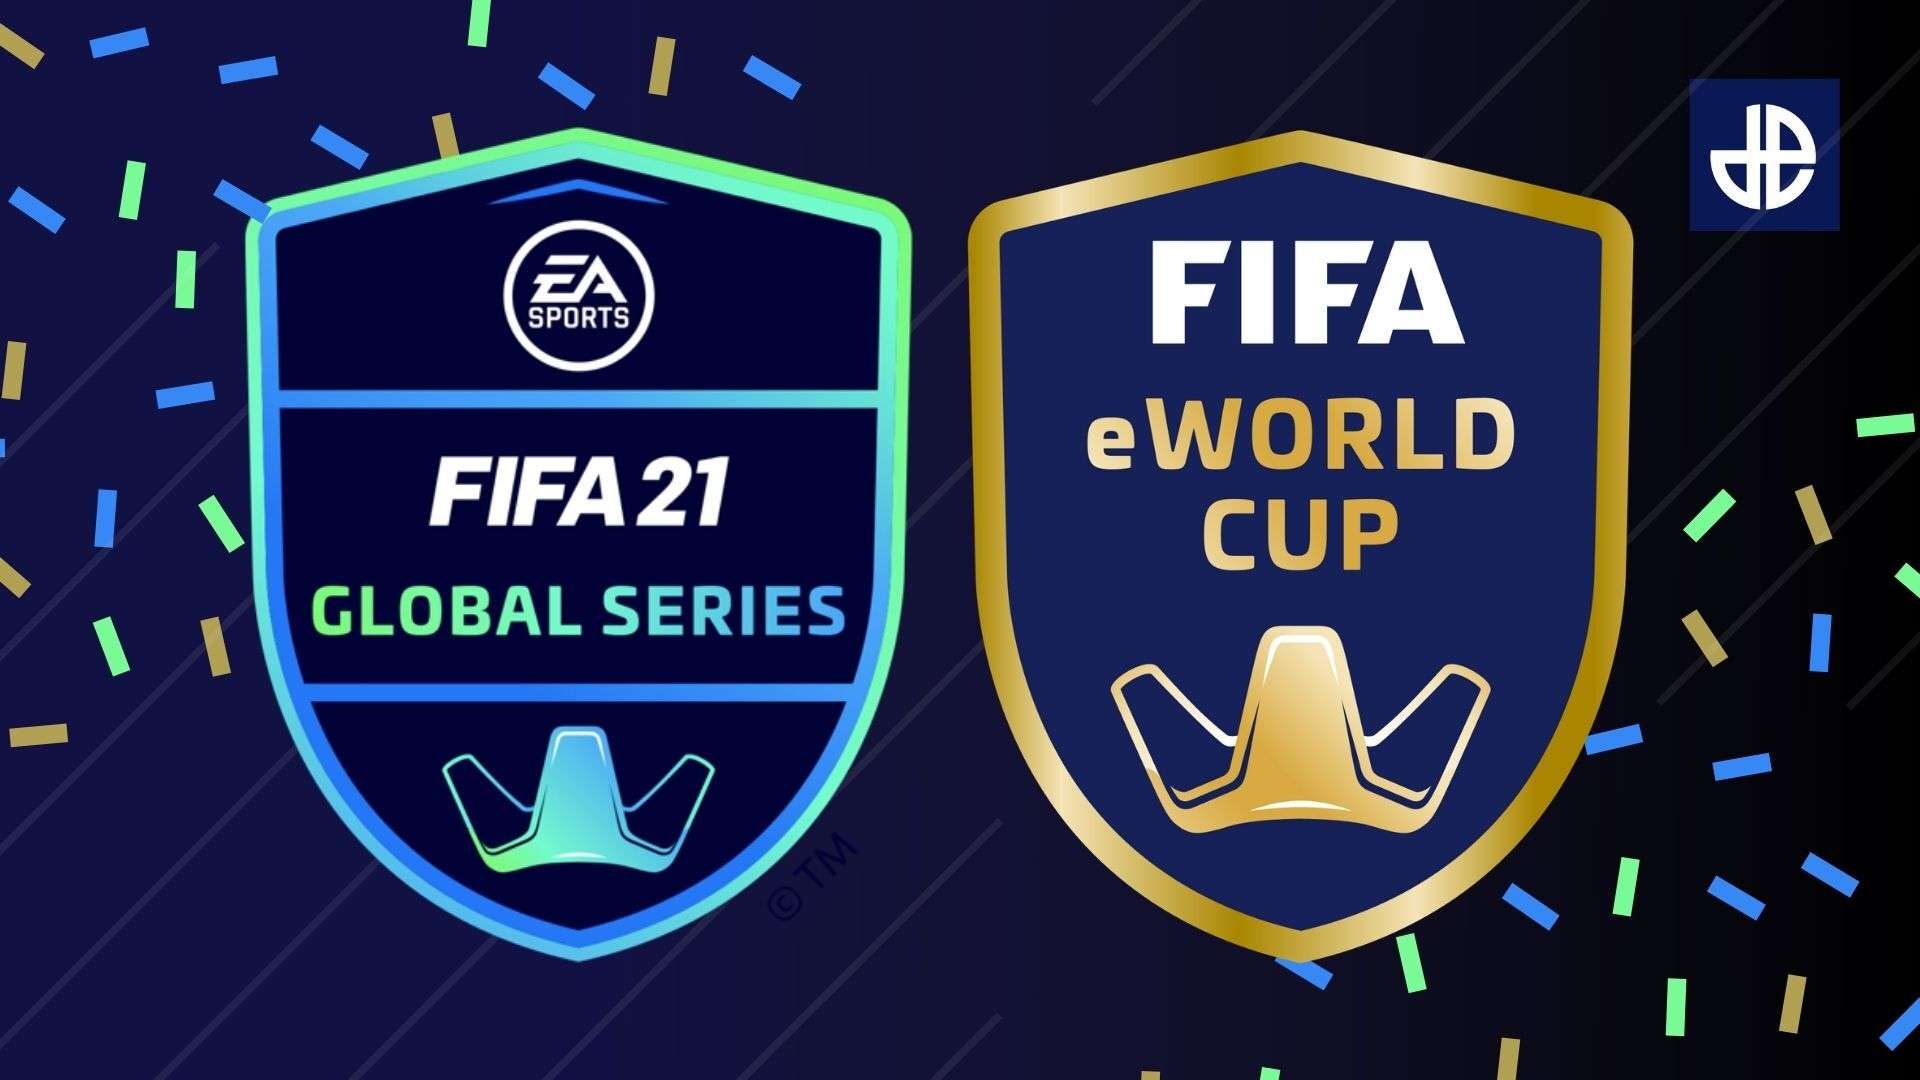 FIFA 21 Global Series and eWorld Cup